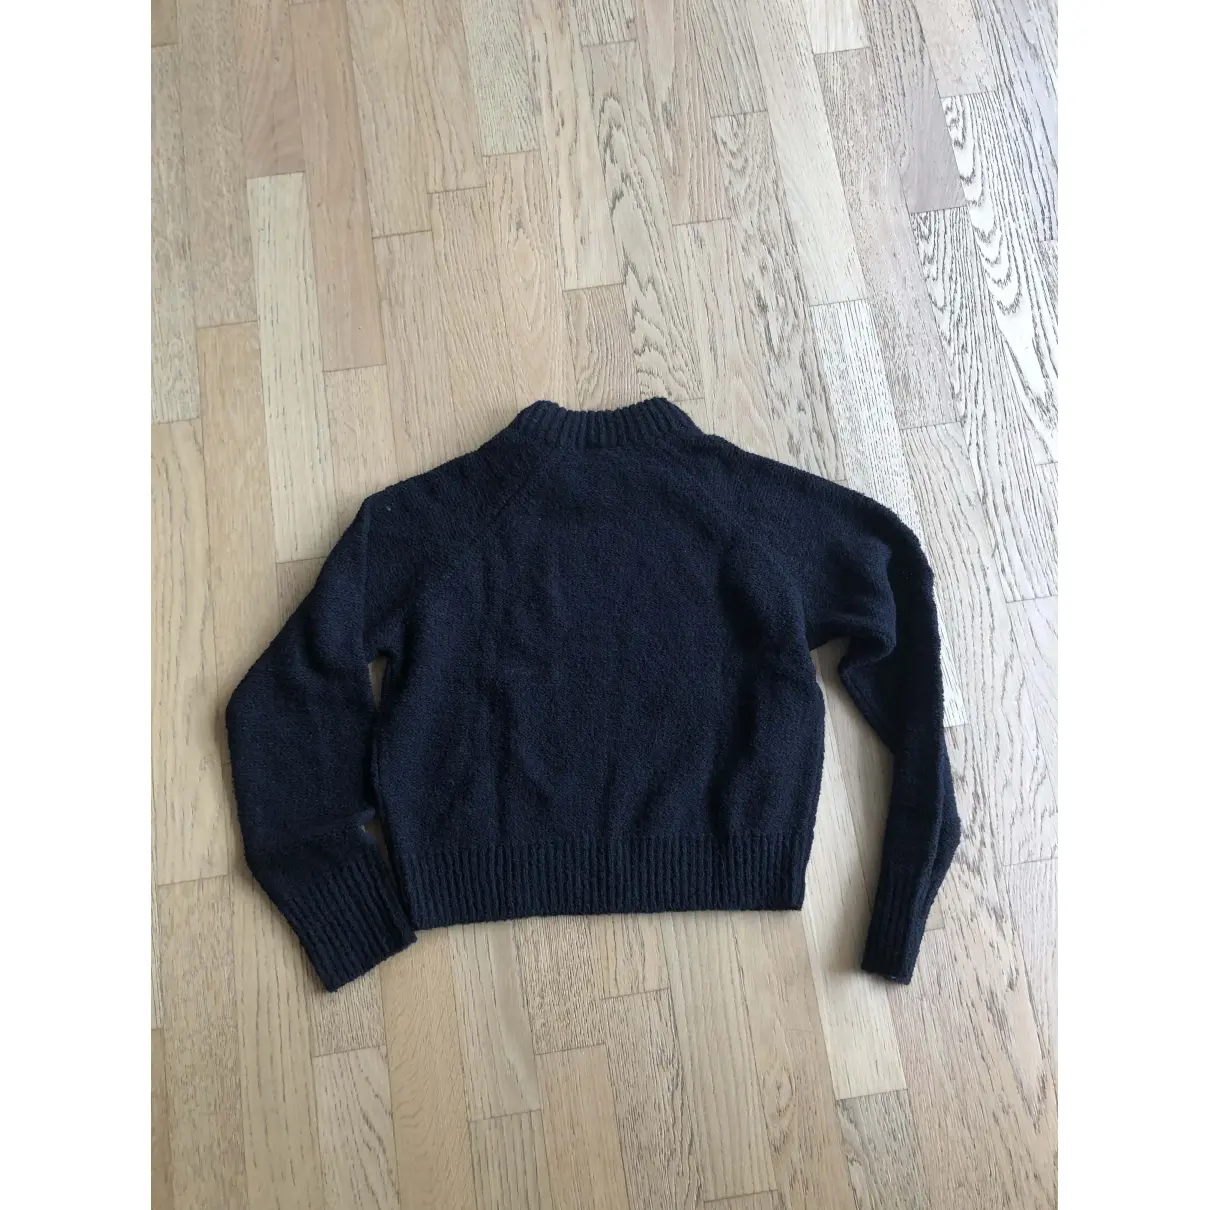 Lemaire x Uniqlo Wool jumper for sale